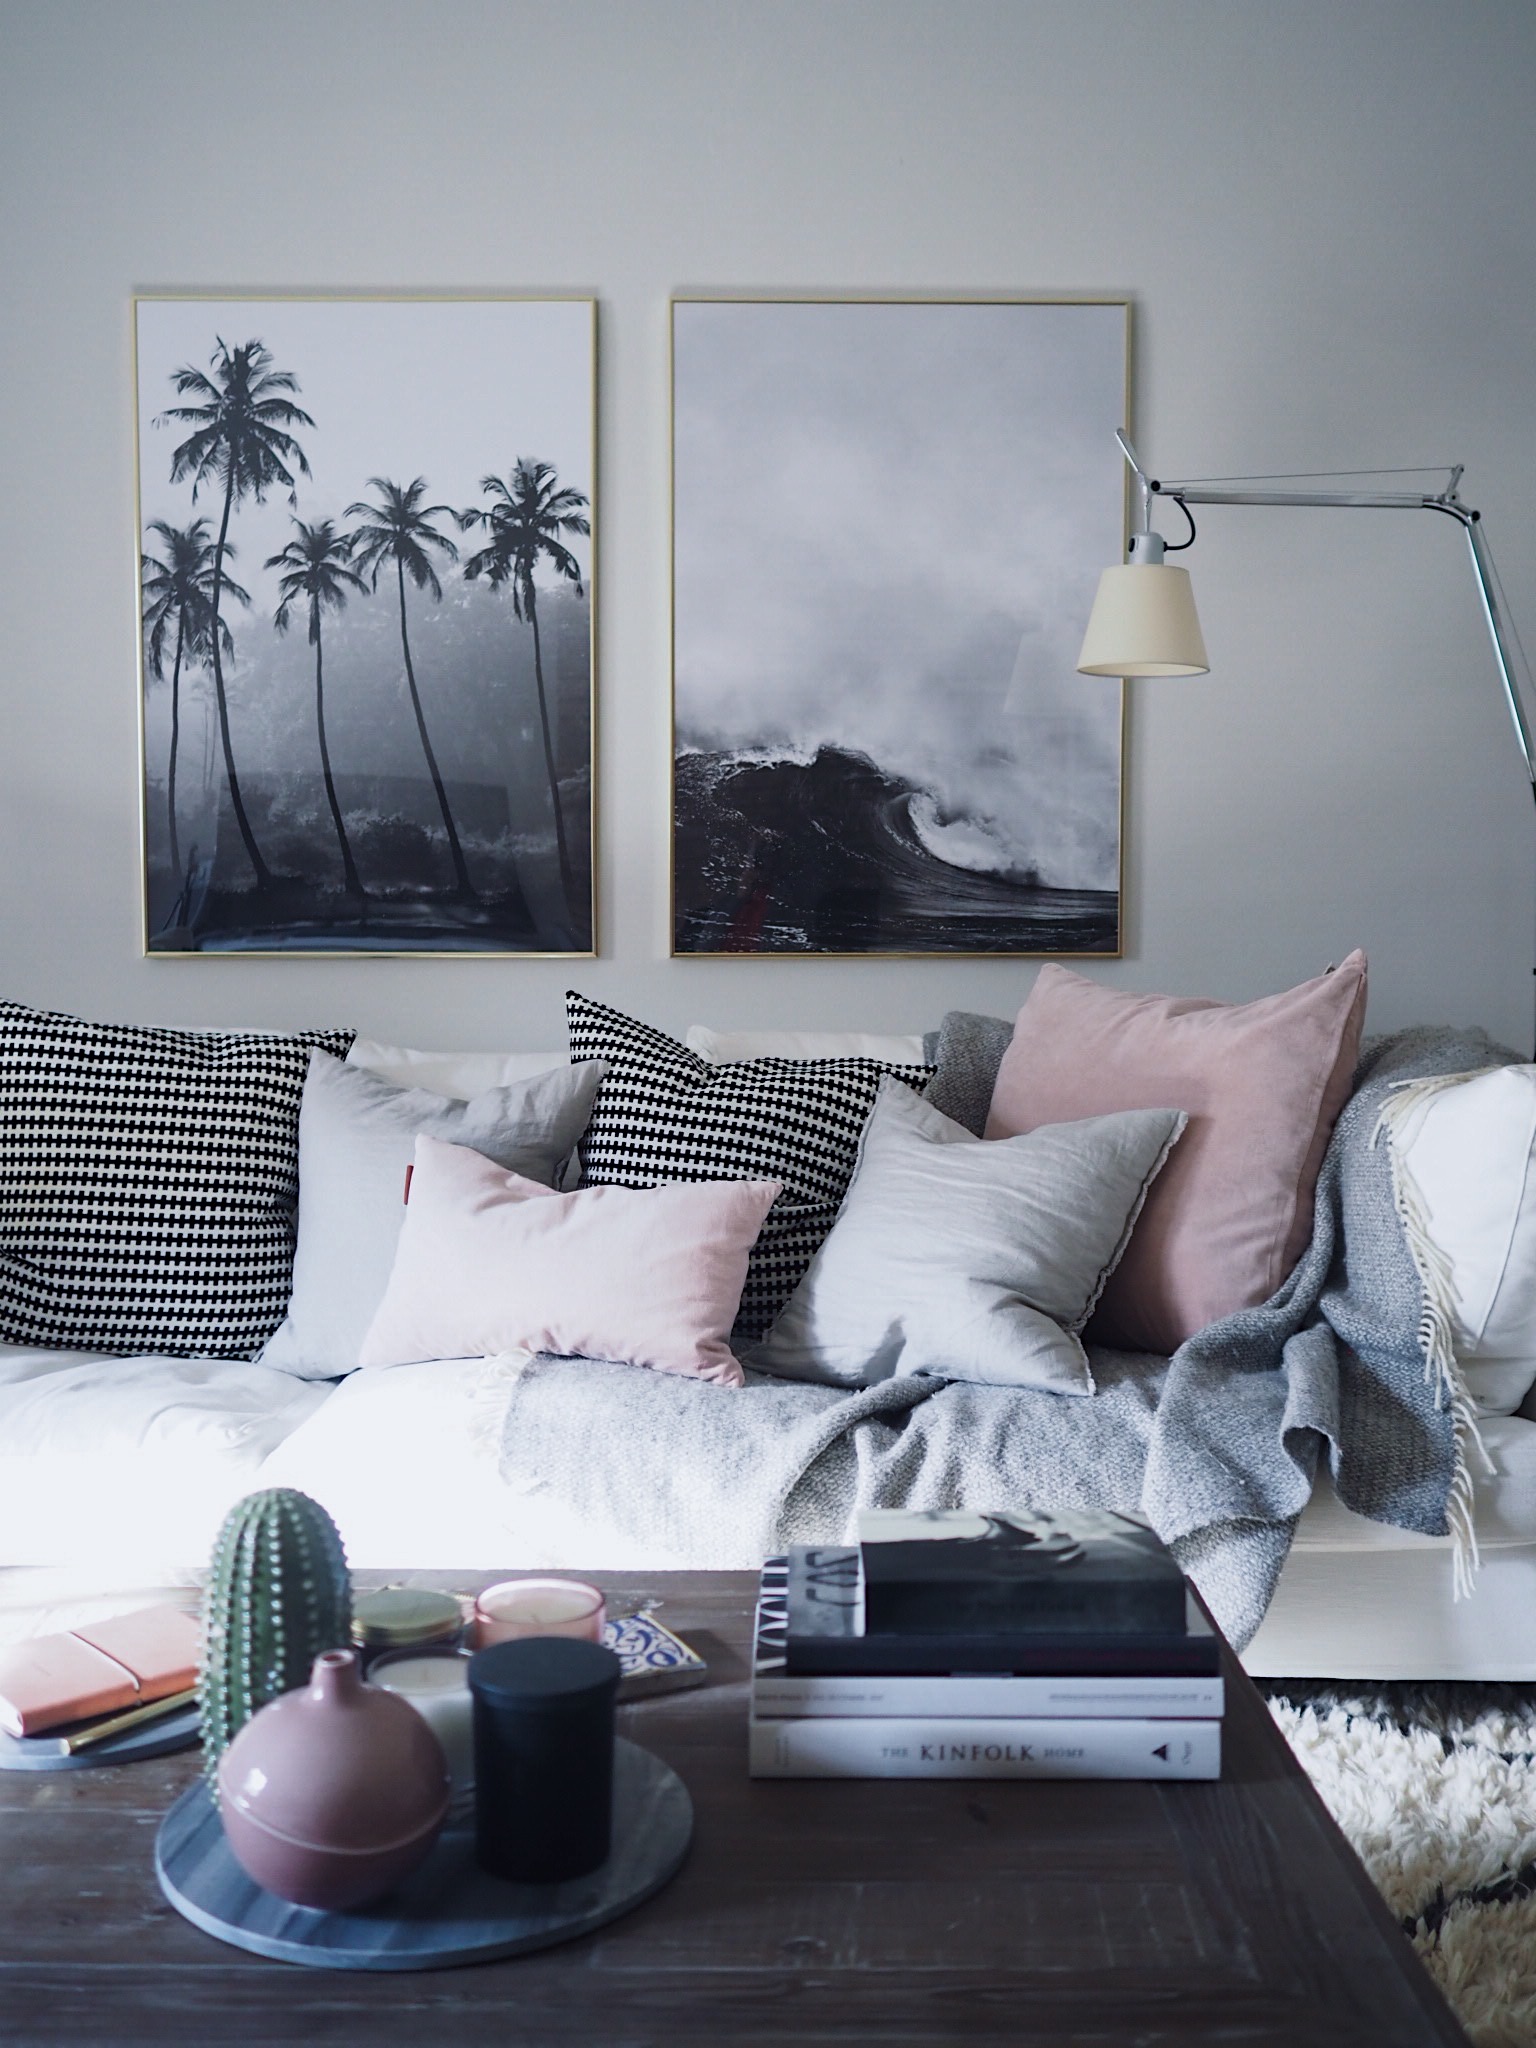 A grey living room with blush pink and striped monochrome cushions on sofa, palm-themed framed wall art and coffee table with decorative cacti ceramicware, and white floor lamp